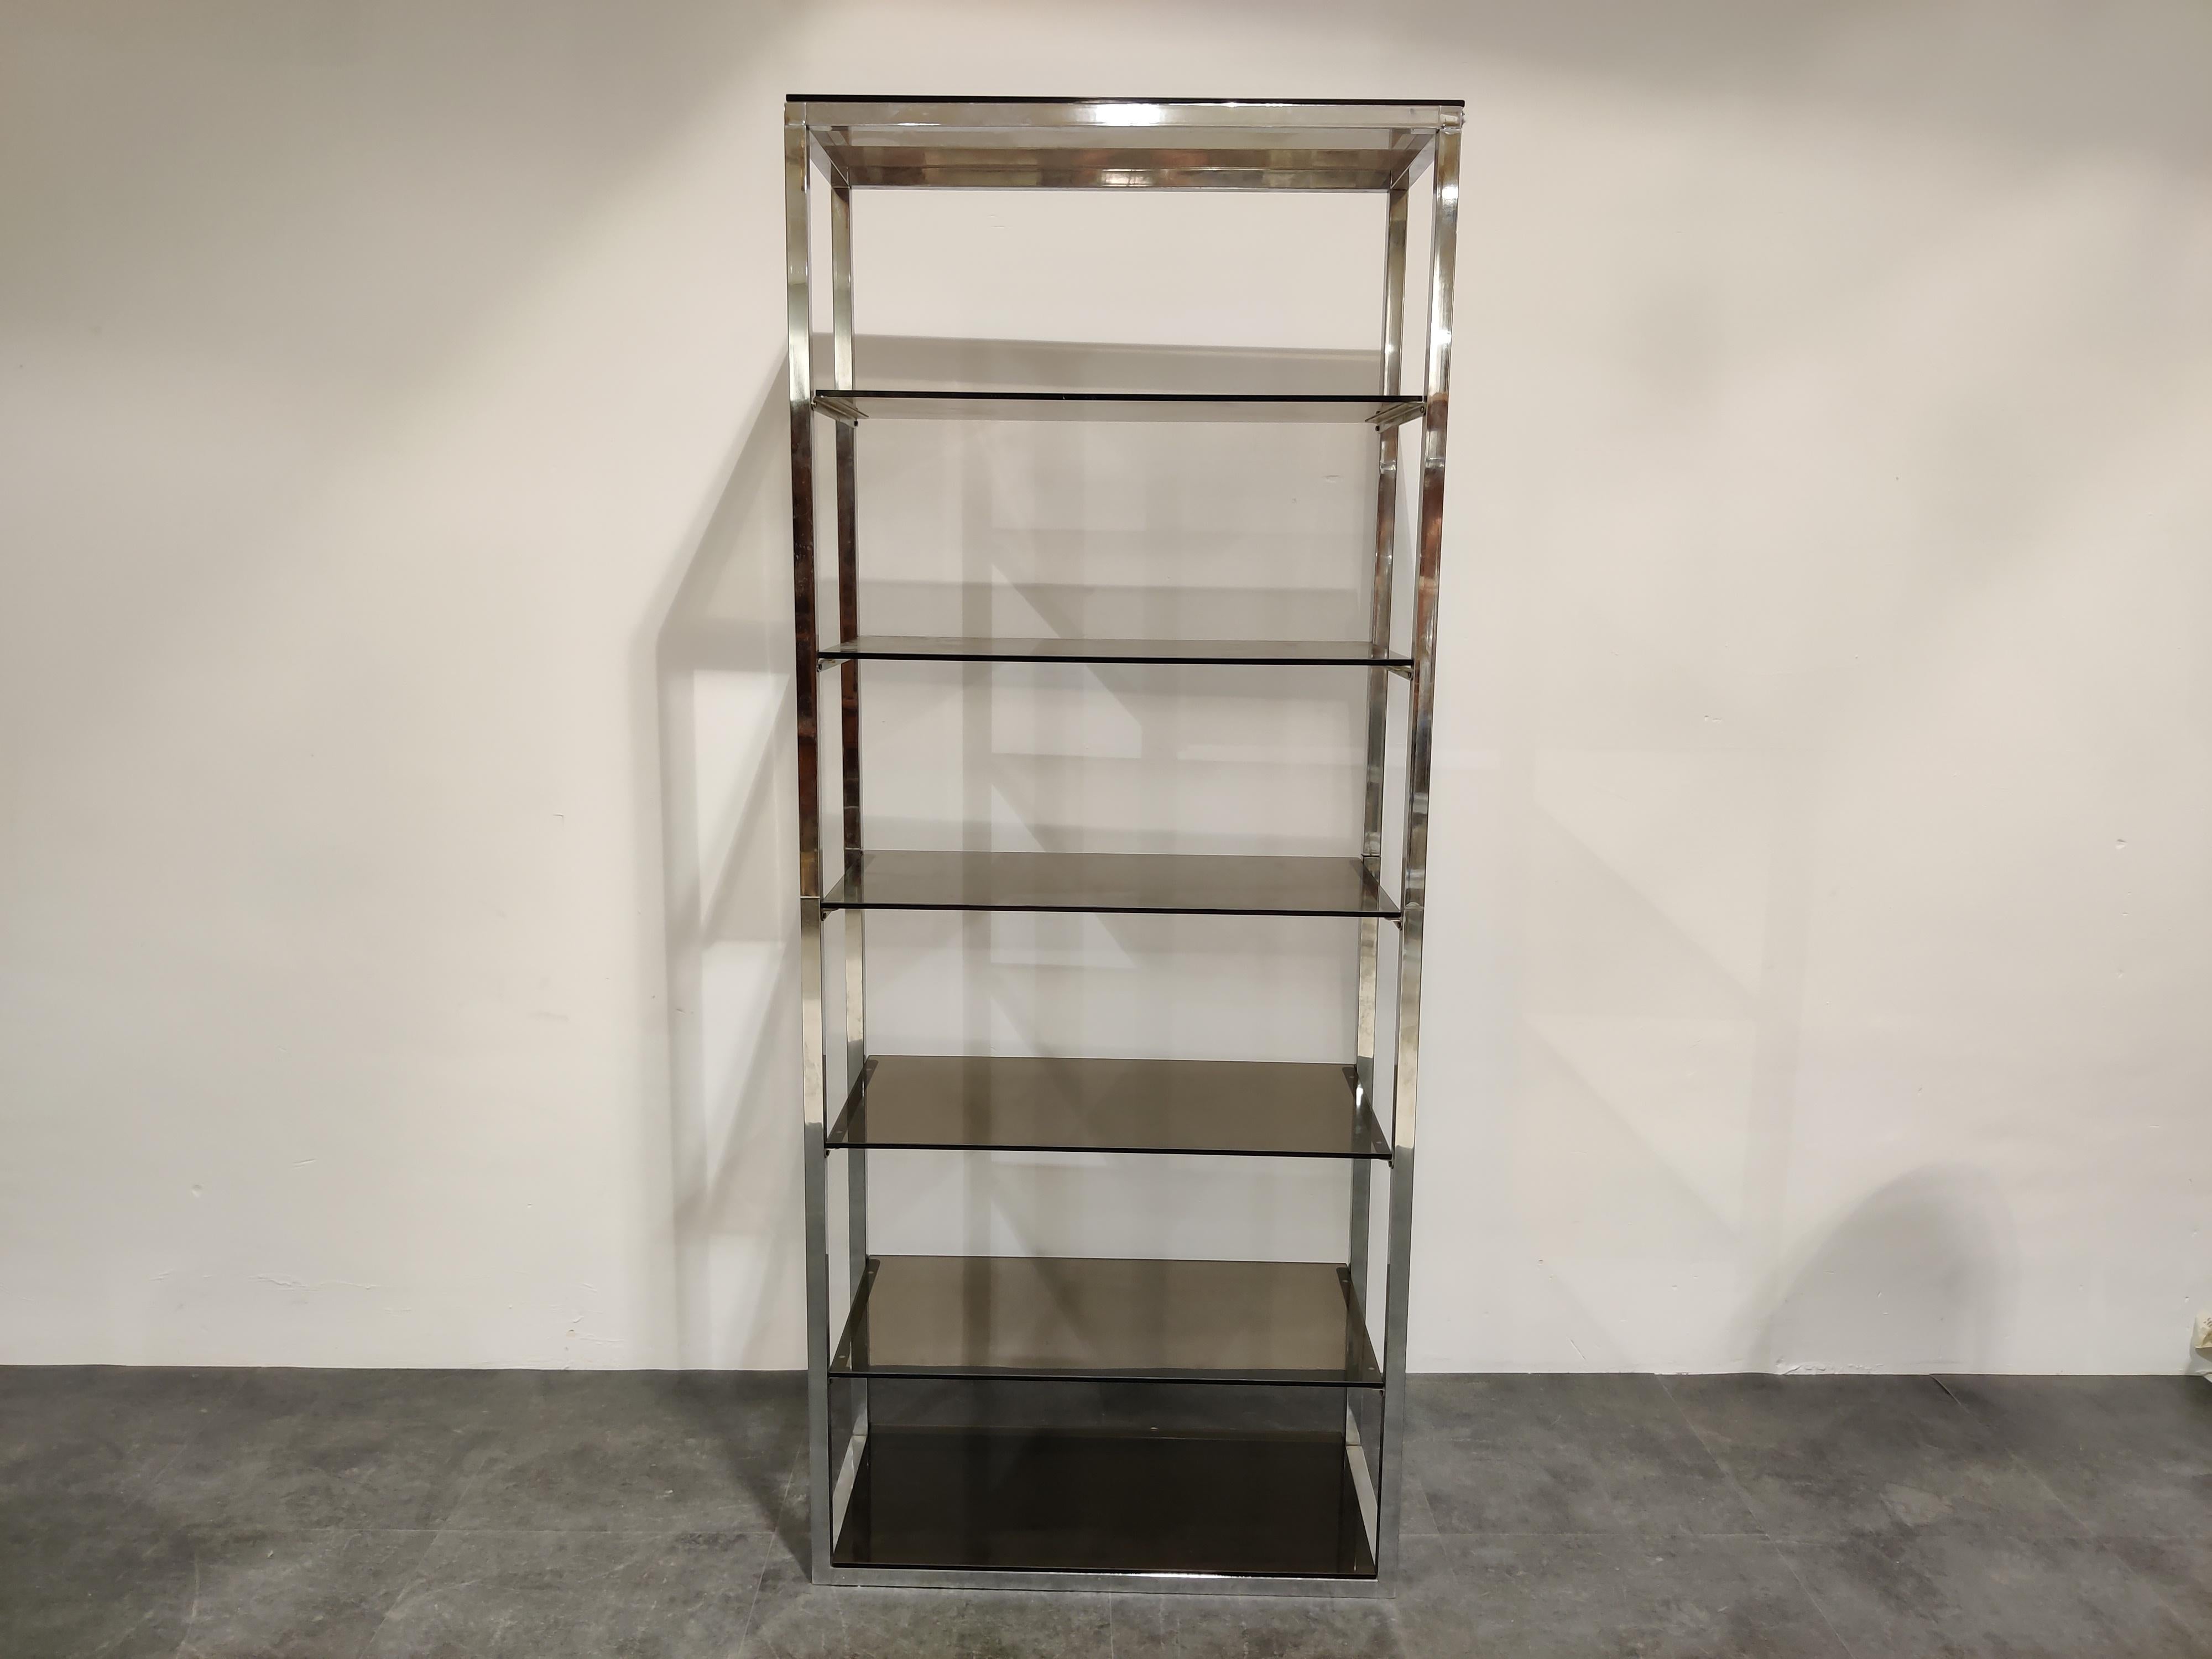 Vintage chrome étagère or bookcase with a chrome frame and smoked glass.

Good condition.

Hollywood Regency/1970s glam style

1970s, Belgium

Measures: Height 185cm/72.83